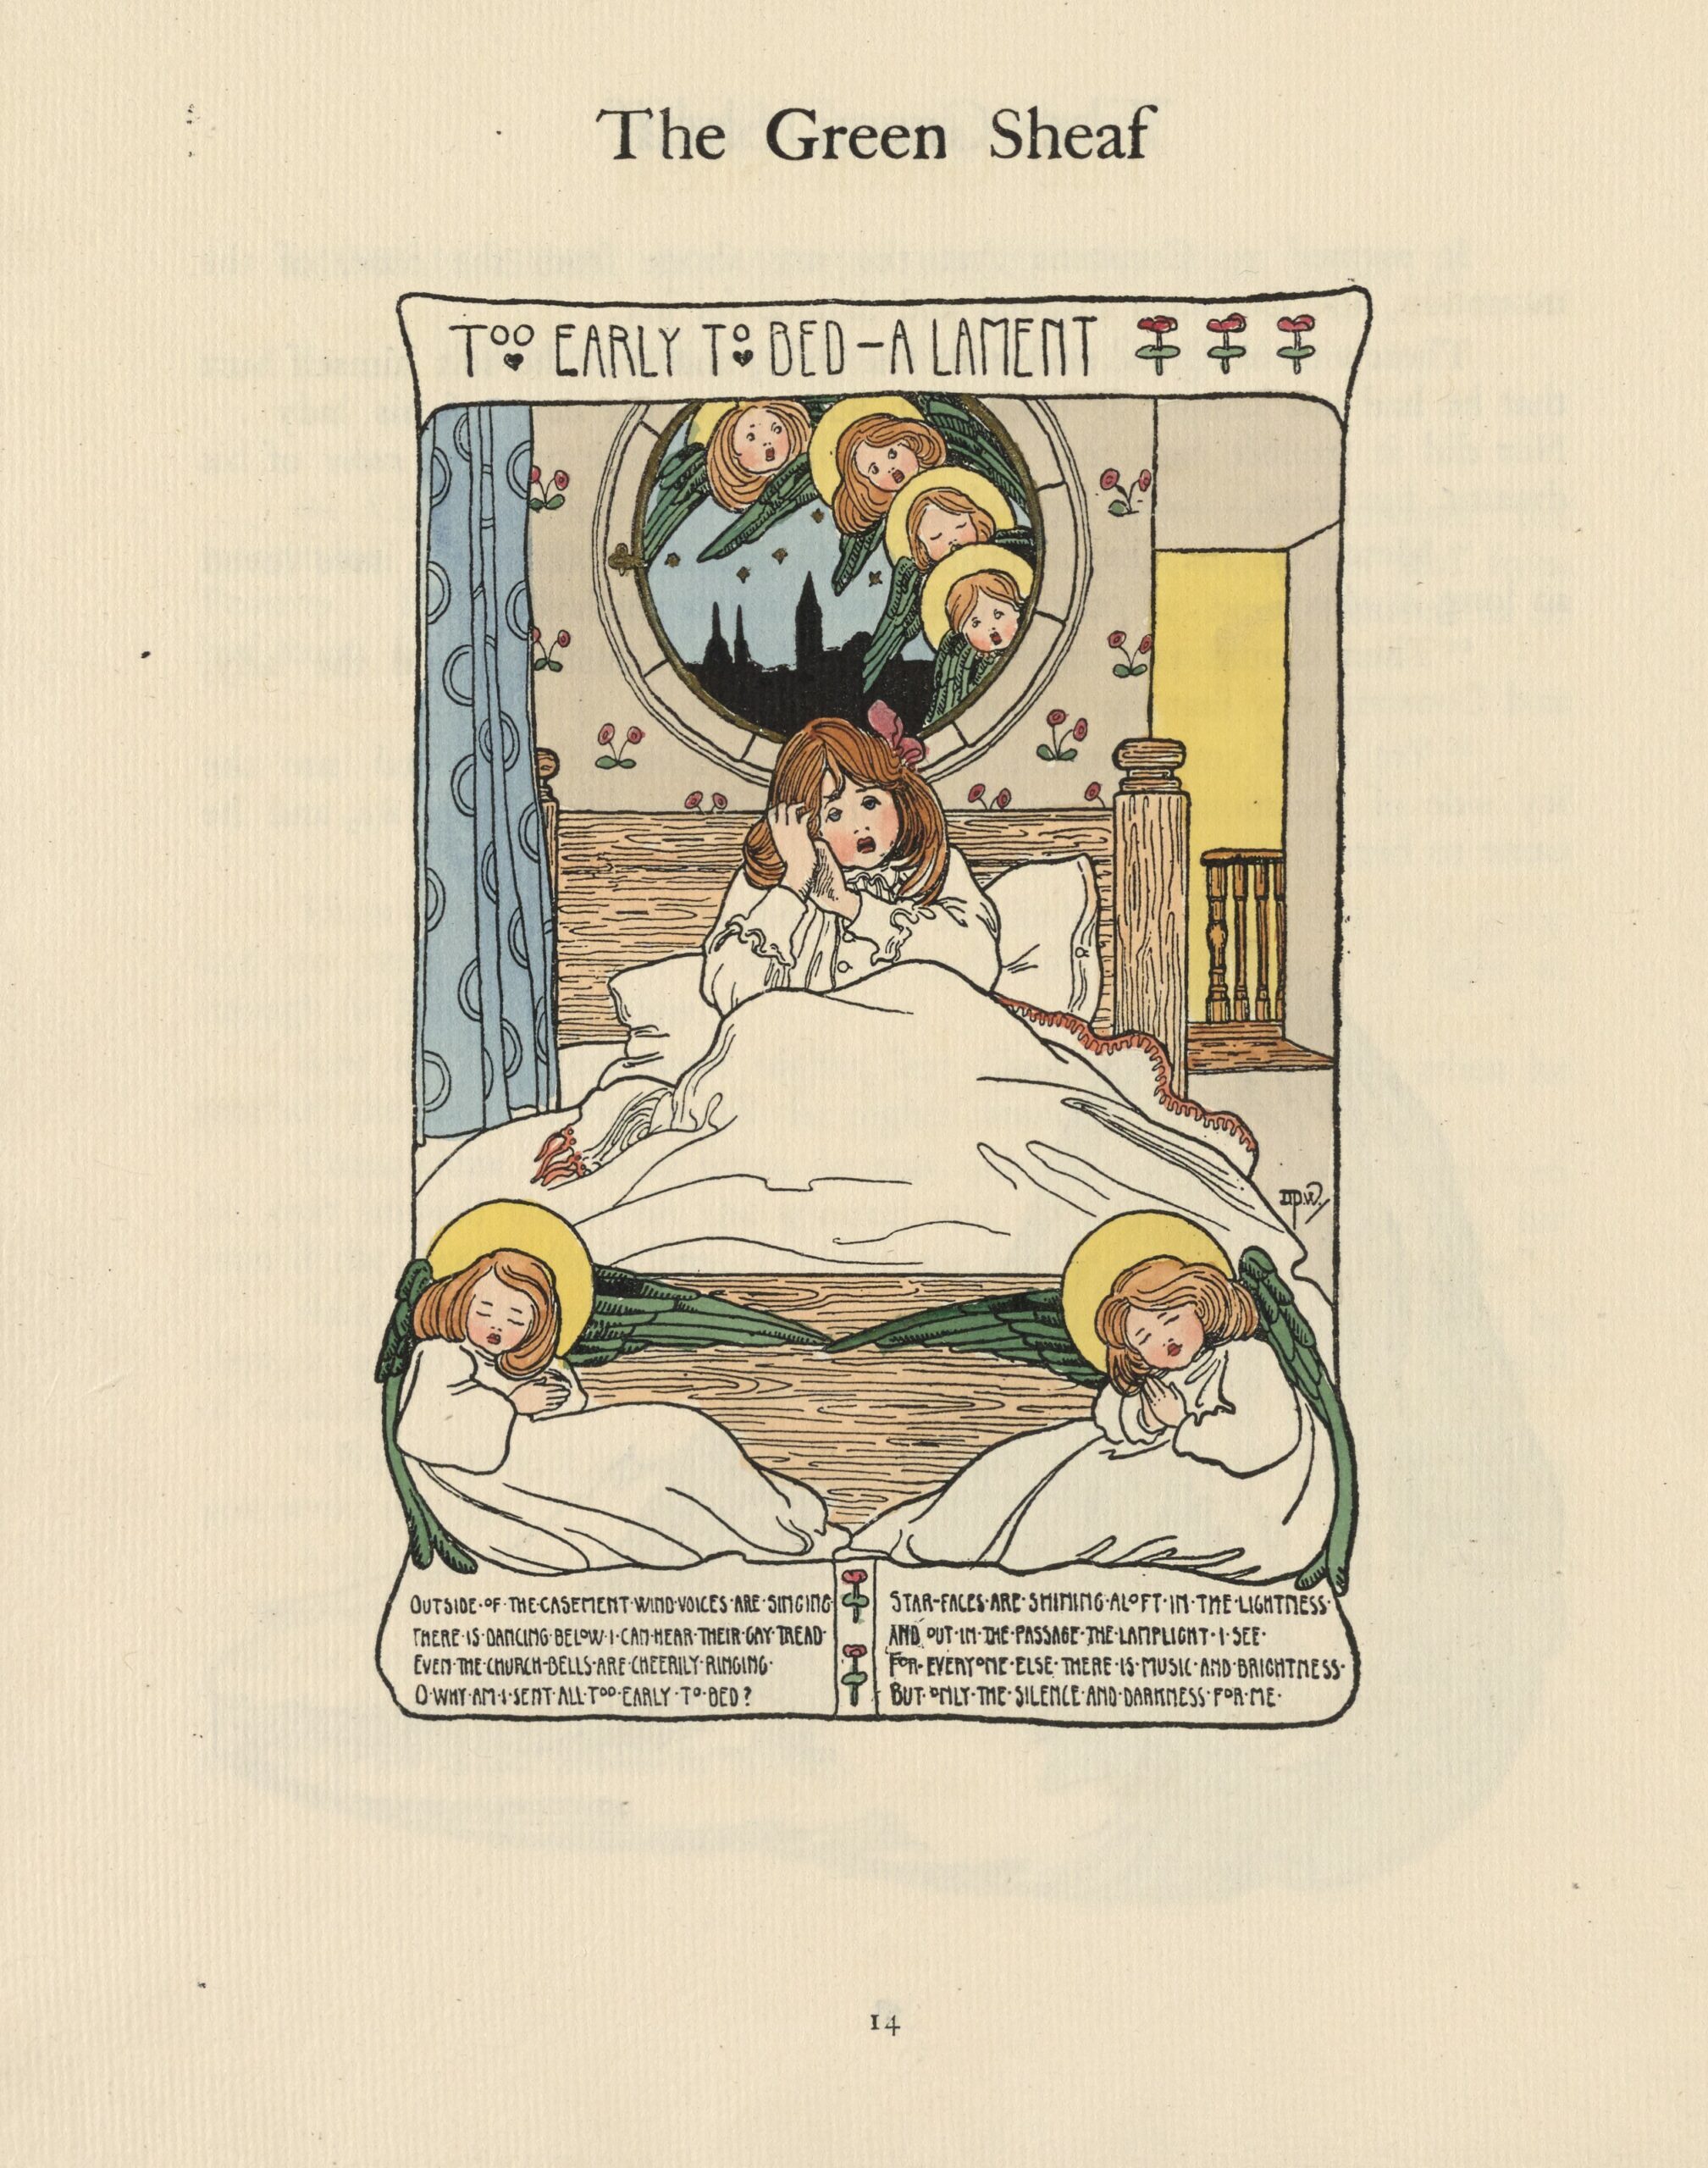 This hand-coloured illustrated poem is centered, occupying a full page. The title is hand-lettered in a cartouche at the top of the image: “Too Early to Bed—A Lament.” The title is followed by three red roses. Below the title, three-quarters of the page displays the central scene: a young girl sitting up in bed, with drowsy eyes. She is pale skinned with light brown hair and wears a white night dress. Behind her, four seraphim peer in through a circular window. The window looks out onto a starry blue evening sky; a cityscape is rendered in silhouette. The seraphim have green wings, golden haloes, and have the same skin and hair colour as the girl. The wallpaper covering the wall around the window is decorated with red flowers. Behind the girl, on the right side of the image, the top of a staircase is visible in the bright light of the room beyond. Two angels recline at the foot of the wood-framed bed, their hands clasped in prayer. Like the seraphim, they have green wings, golden haloes, and look similar to the girl. Below the angels is a cartouche containing the poem’s calligraphic text: “Outside of the casement wind voices are singing / There is dancing below I can hear their gay tread / Even the church bells are cheerily ringing / O why am I sent all too early to bed? / Star faces are shining aloft in the lightness / And out in the passage the lamplight I see / For everyone else there is music and brightness / But only the silence and darkness for me.” The artist’s monogram is visible at the bottom right of the bed.